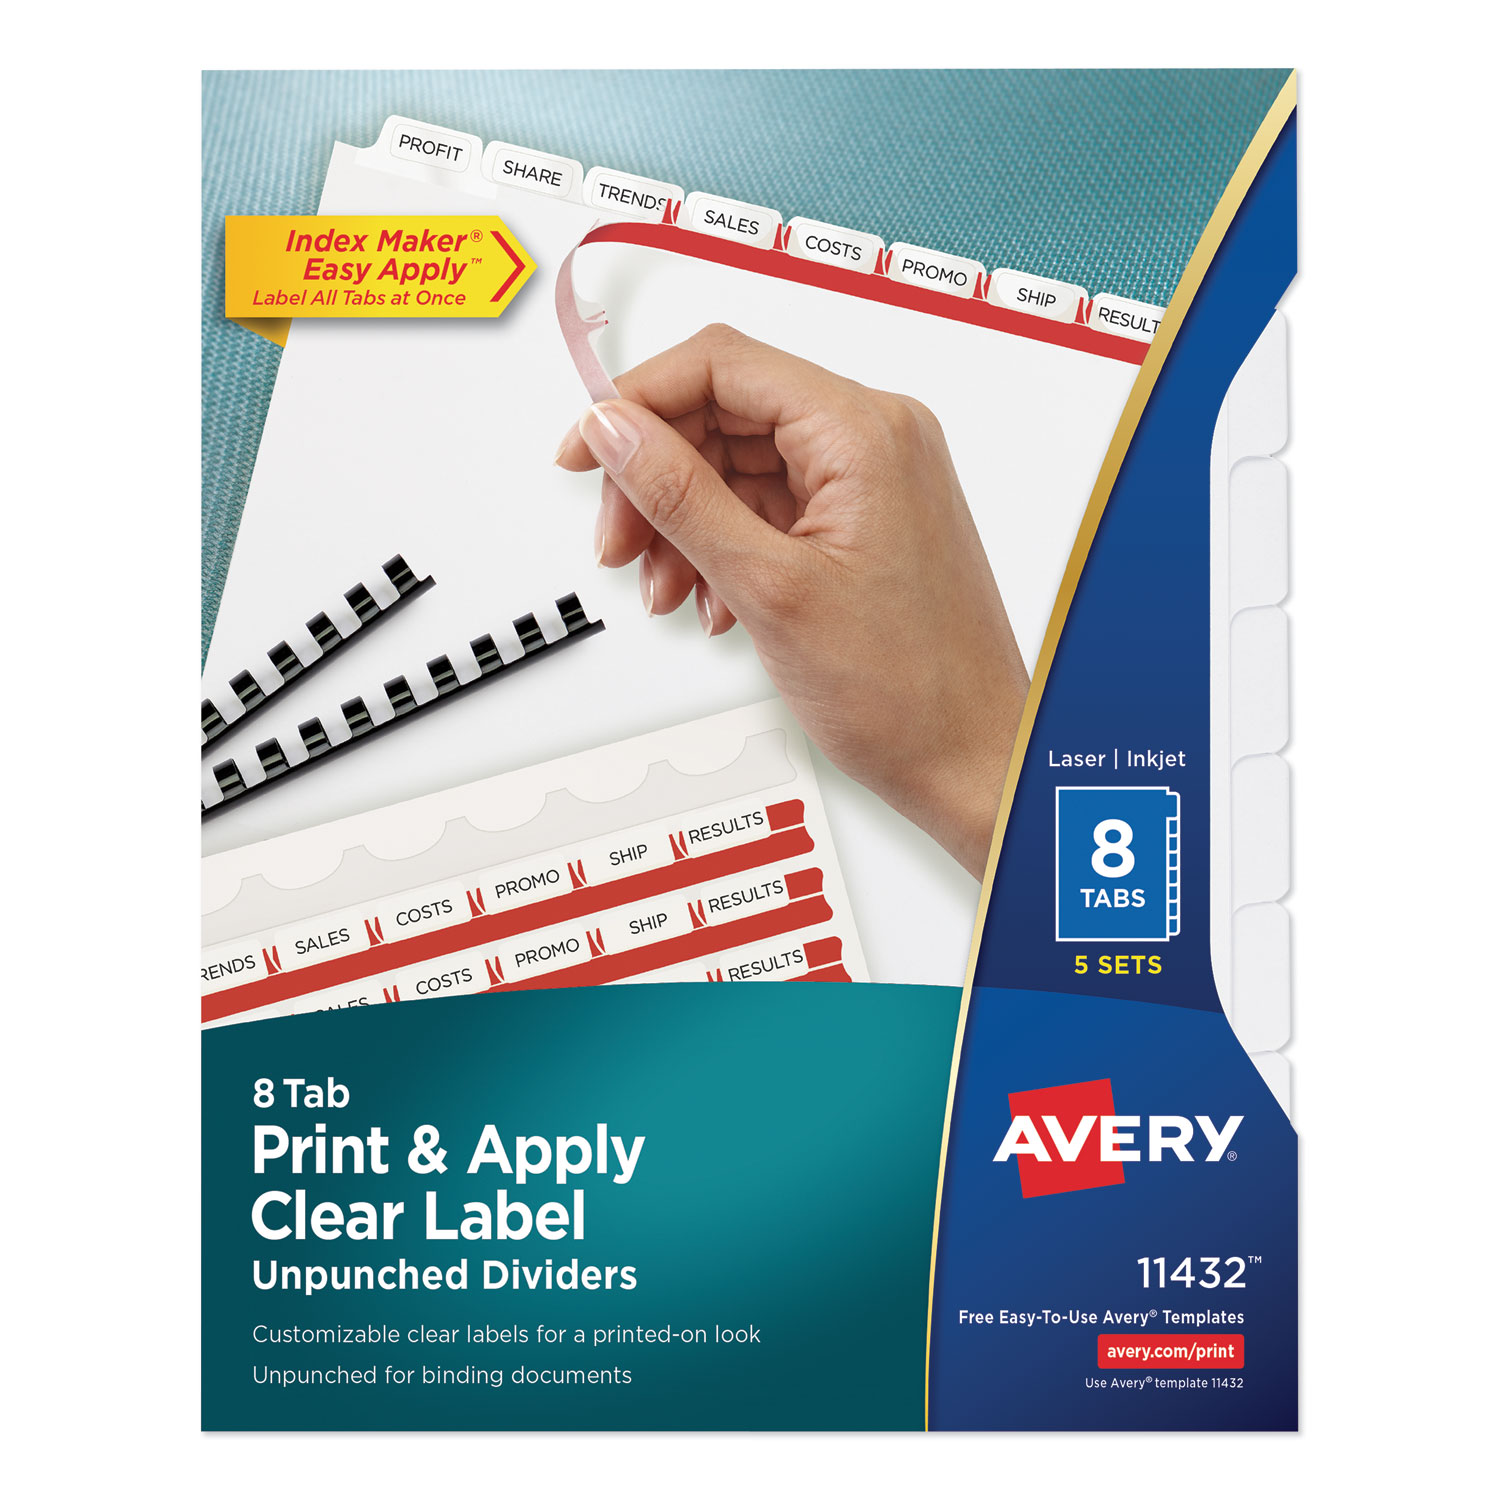  Avery 11432 Print and Apply Index Maker Clear Label Unpunched Dividers, 8Tab, Letter, 5 Sets (AVE11432) 